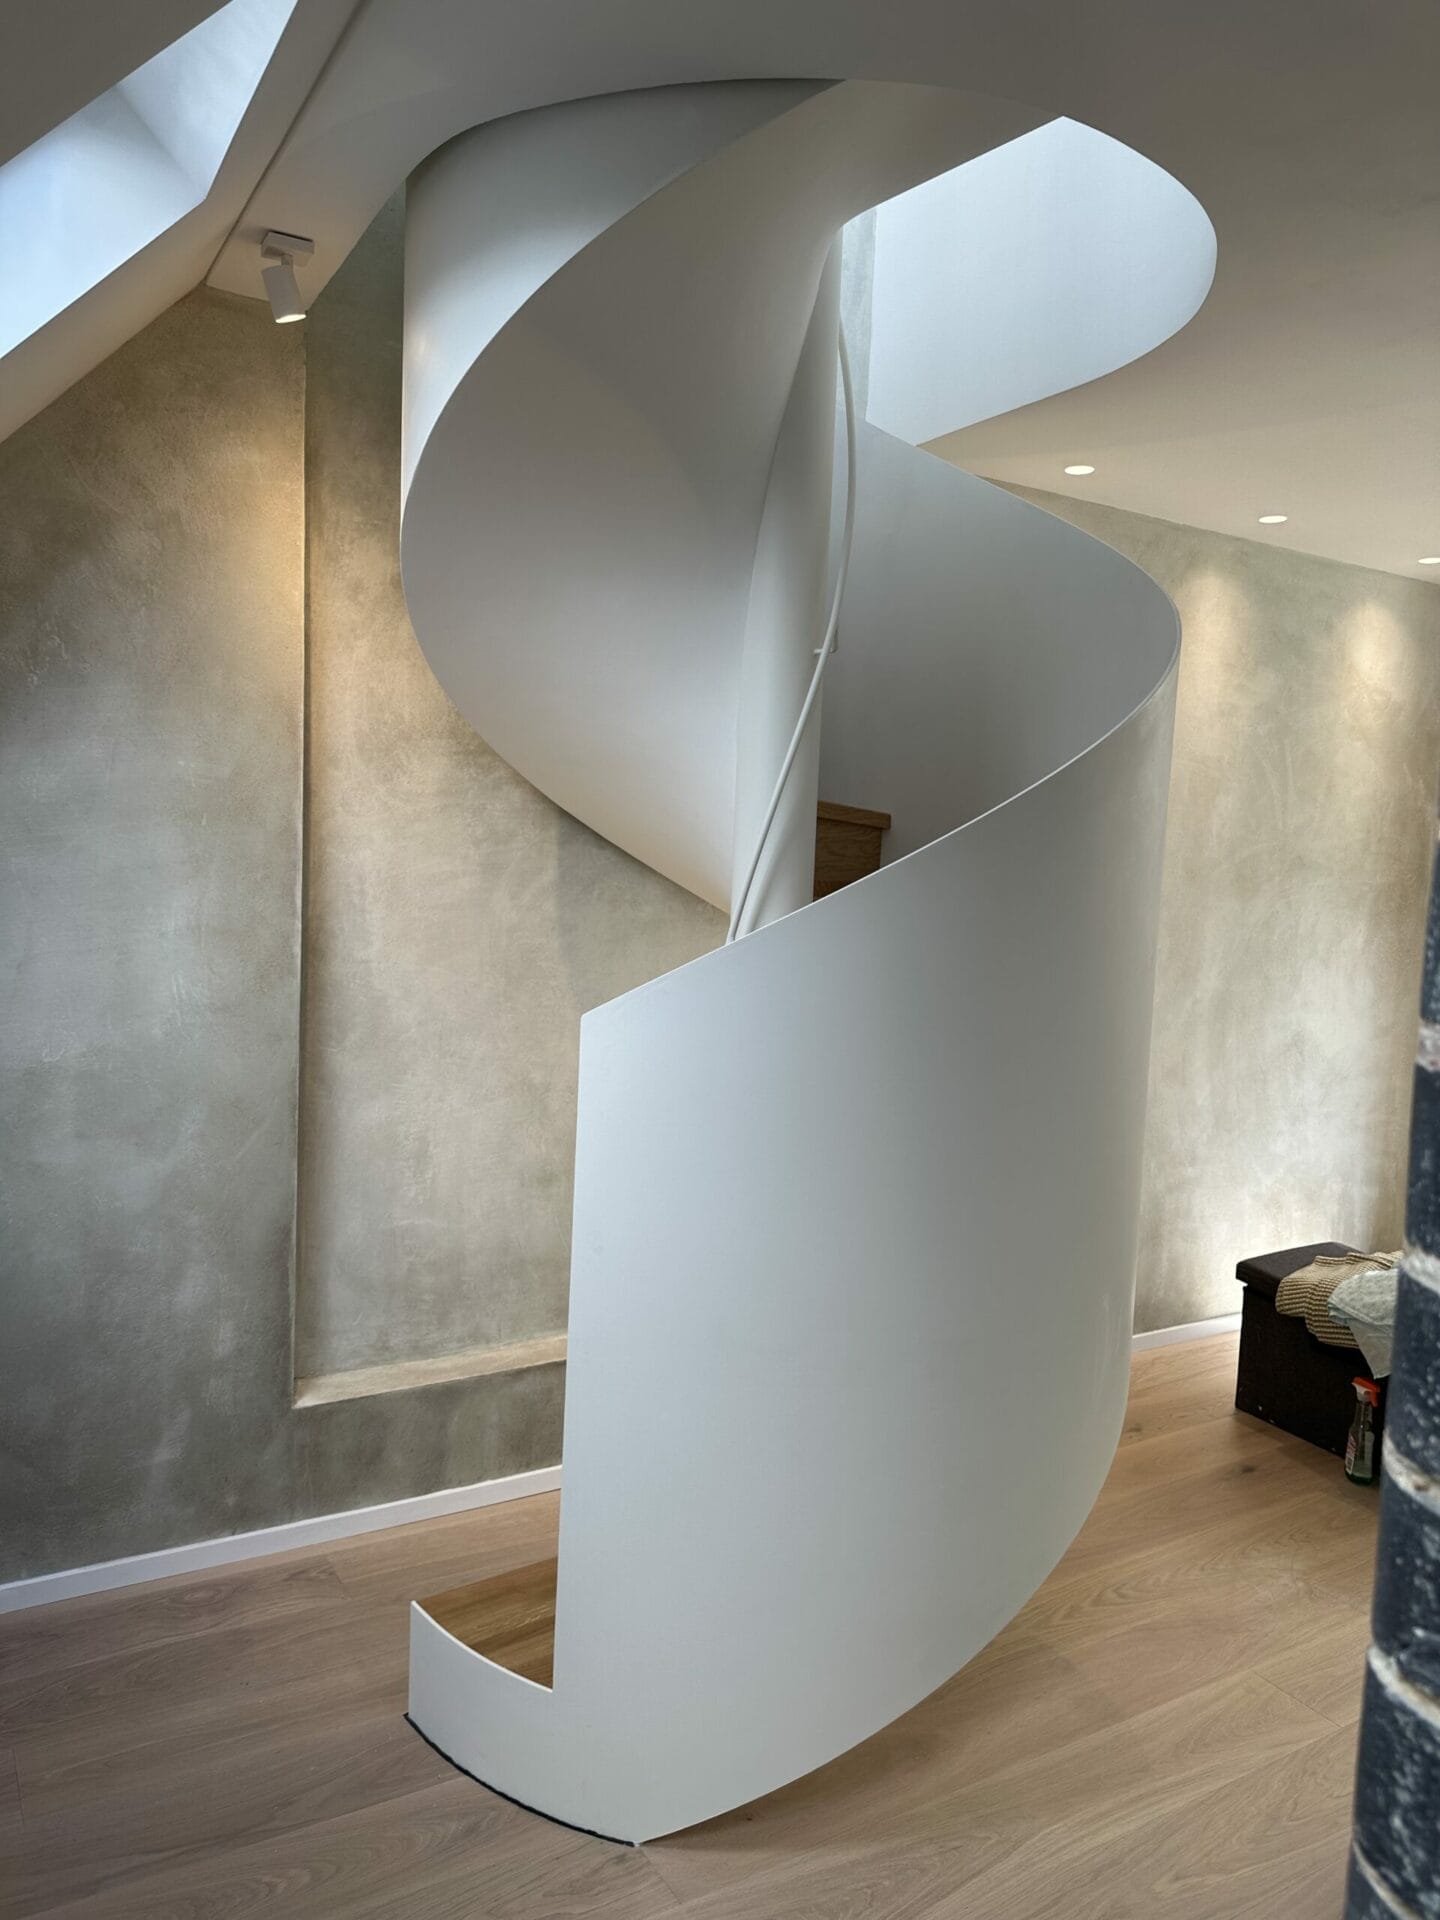 Internal Spiral Staircase Made of Curved Metal